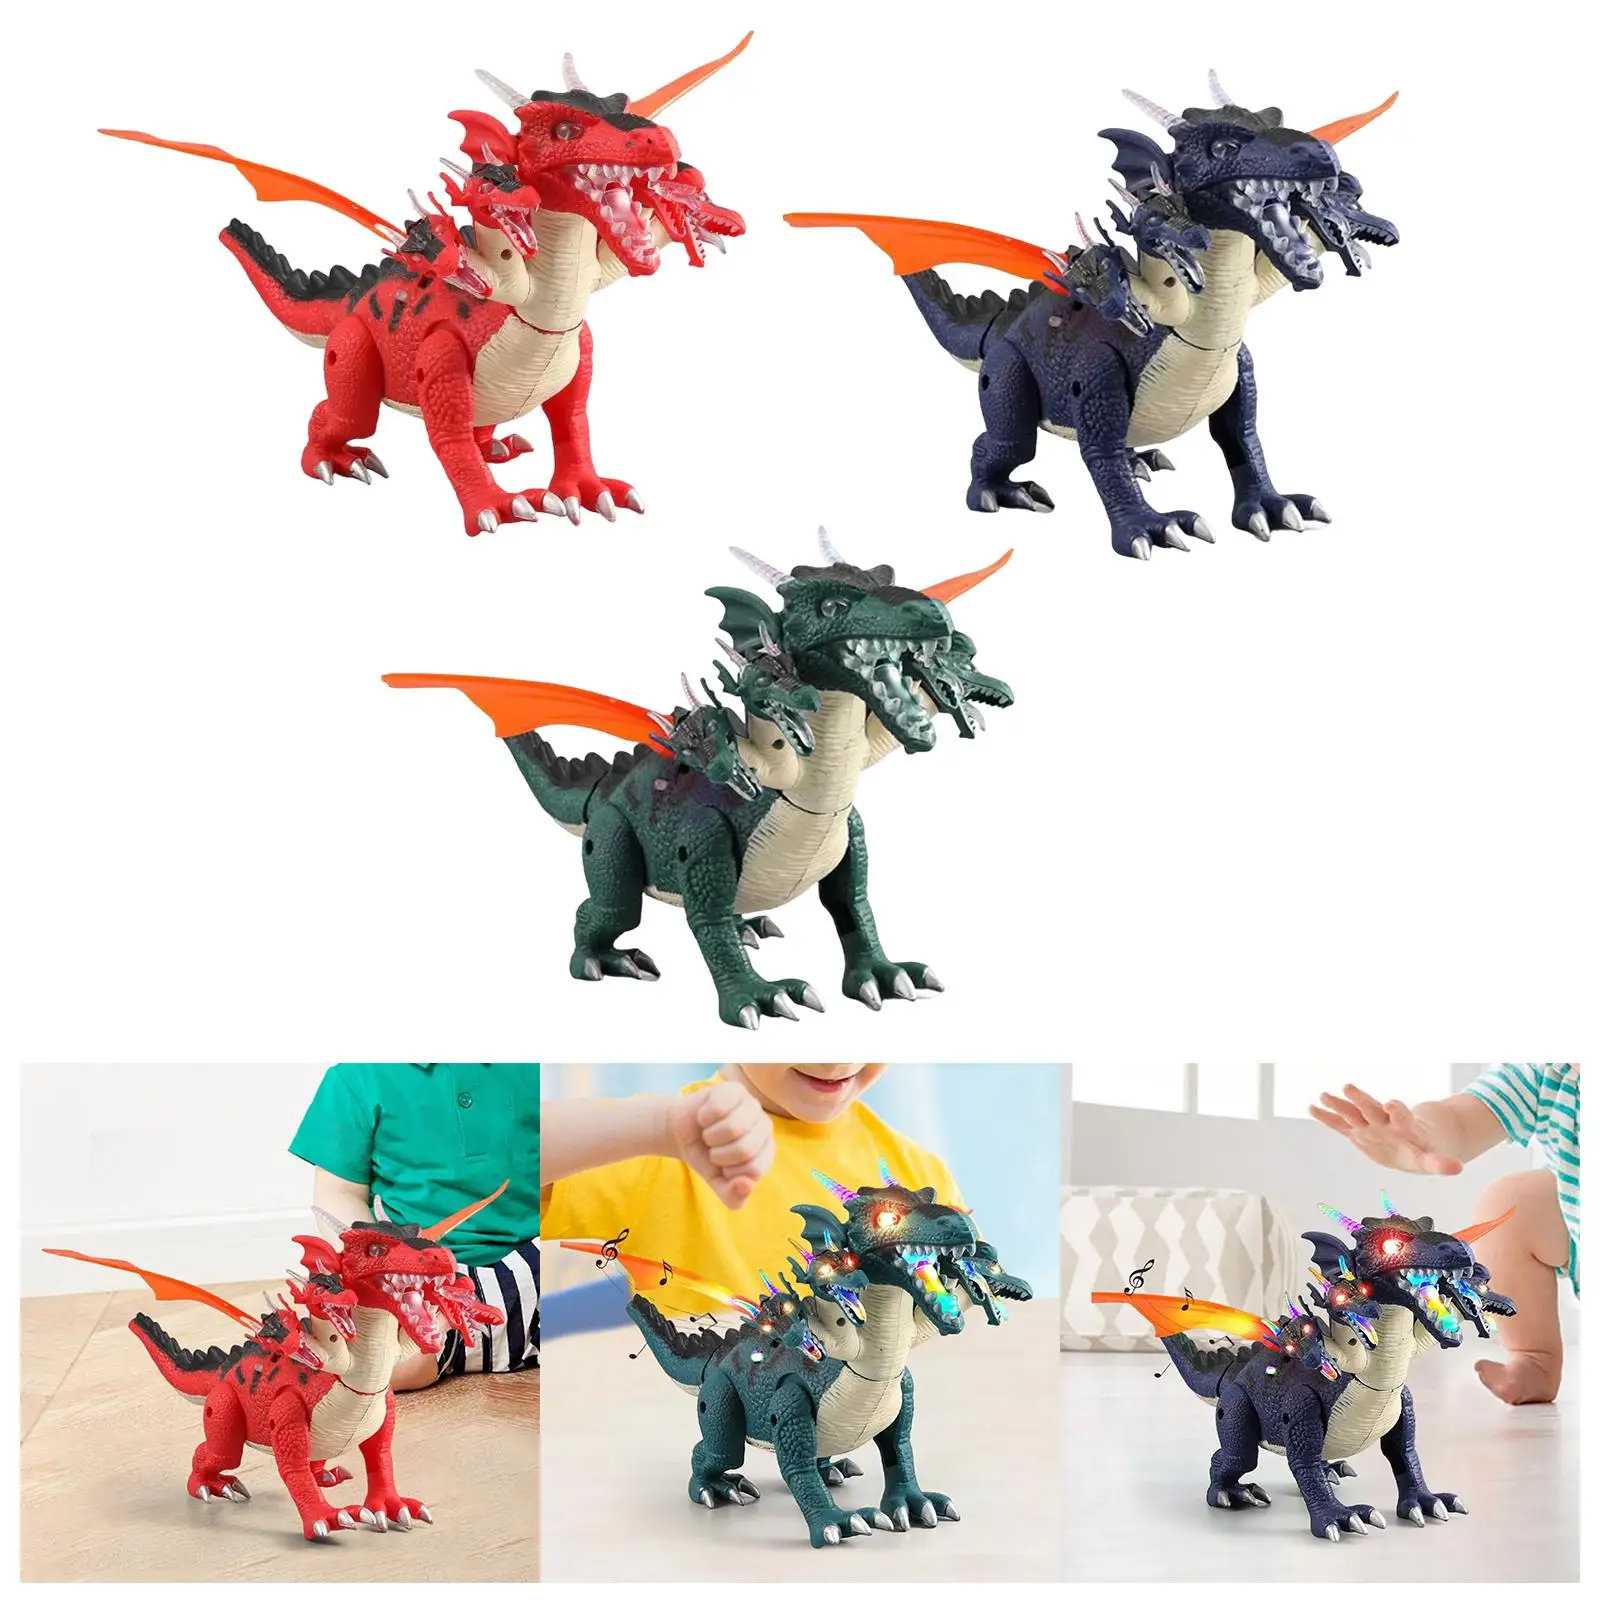 Electric Dinosaur Toys Spray with Lights Realistic Sounds Walking Robot Dinosaur Educational Toys Birthday Gifts for Girls Boys